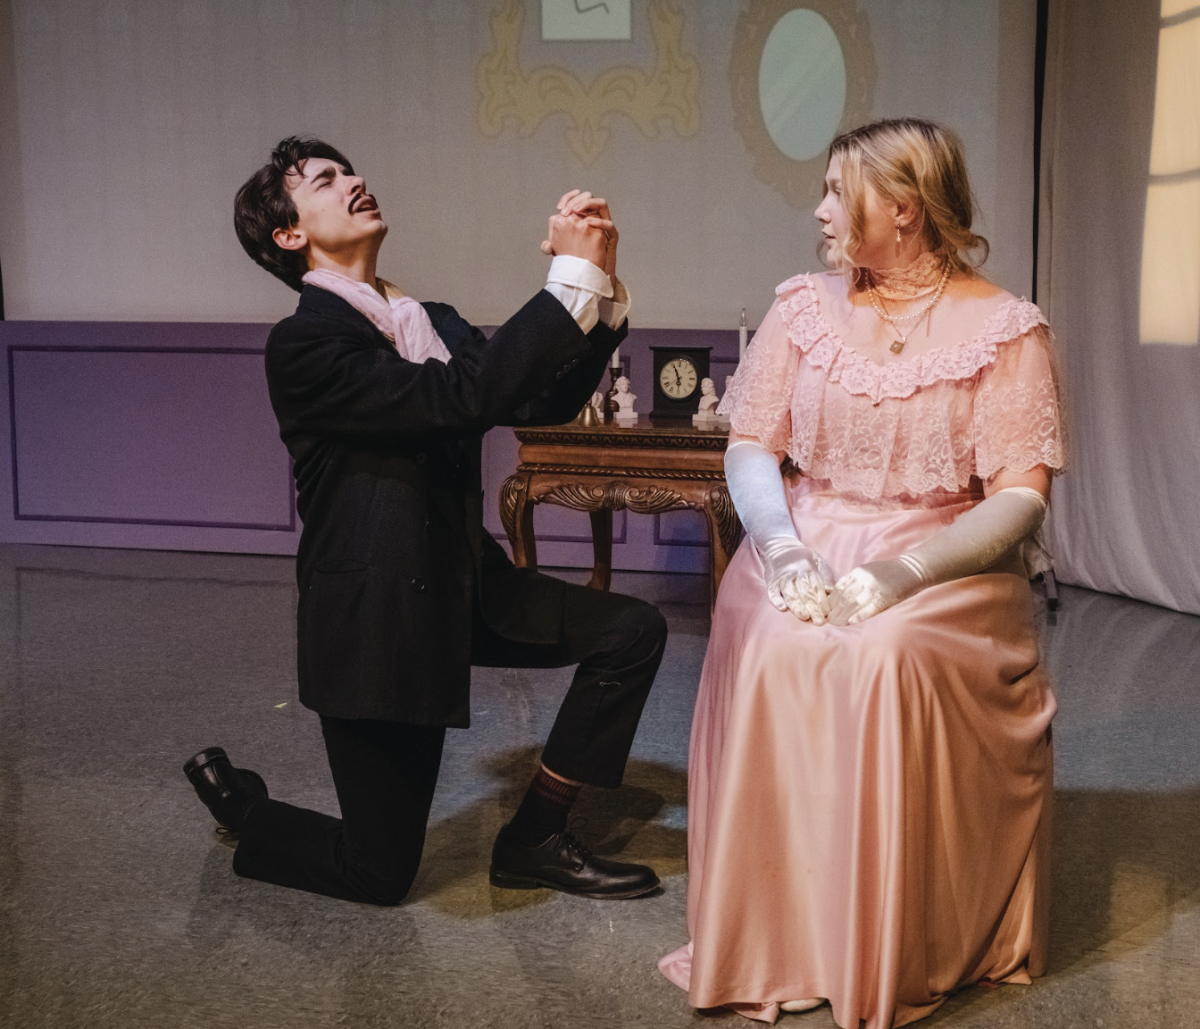 PHOTO GALLERY: The Importance of Being Earnest